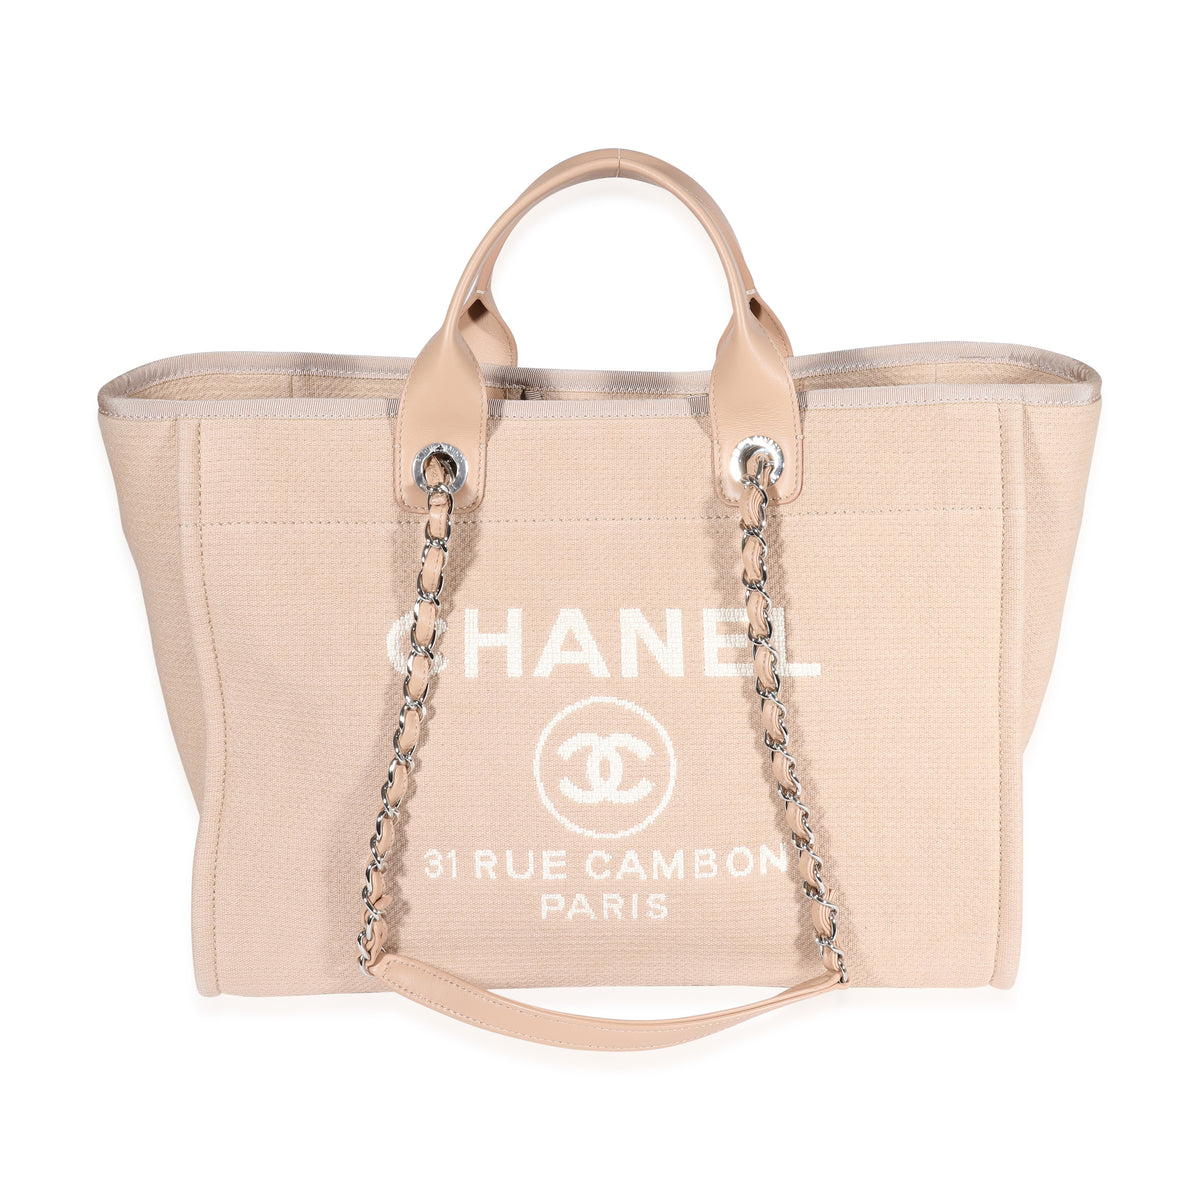 Chanel Beige Canvas & Leather Large Deauville Tote, myGemma, SG